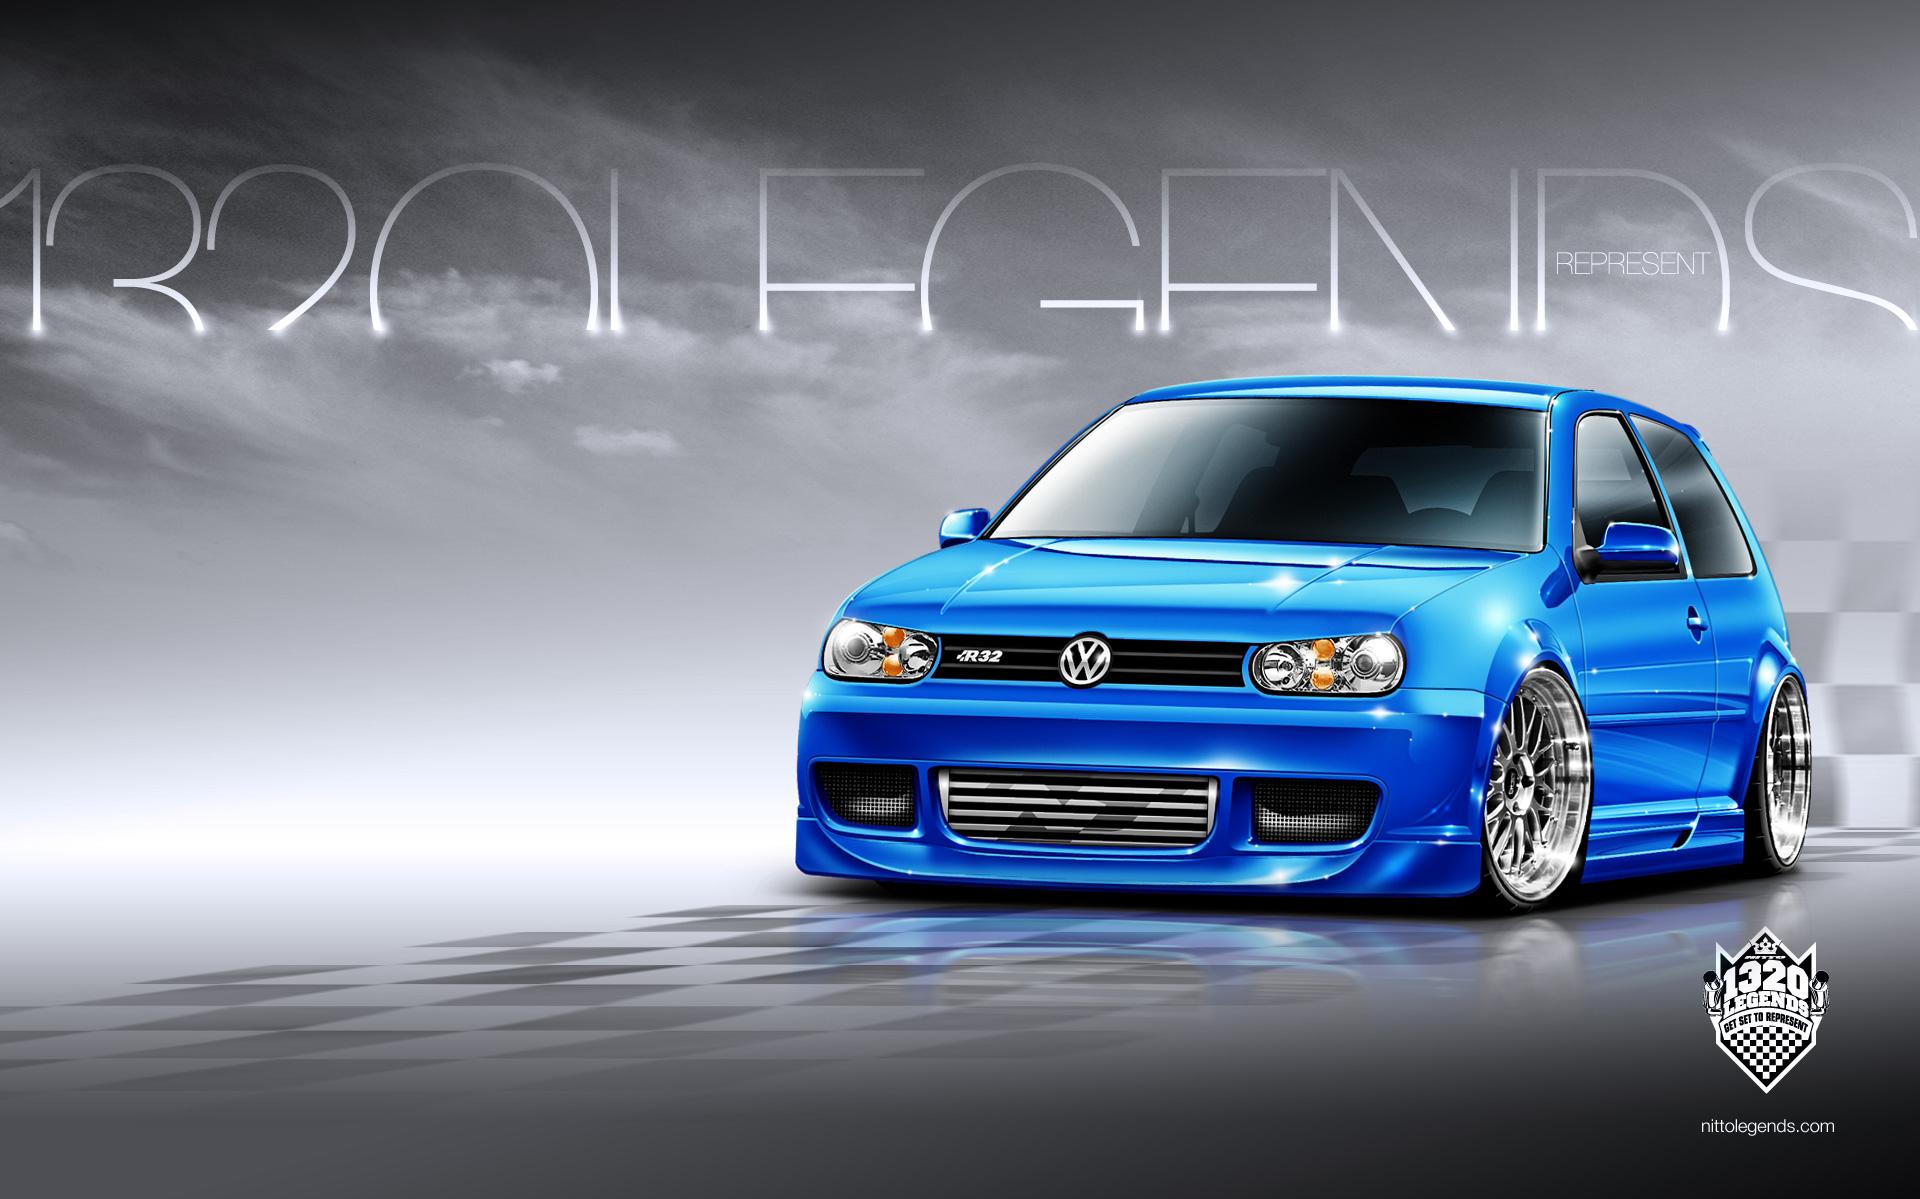 Nitto Legends Vw R32 By Signalxb